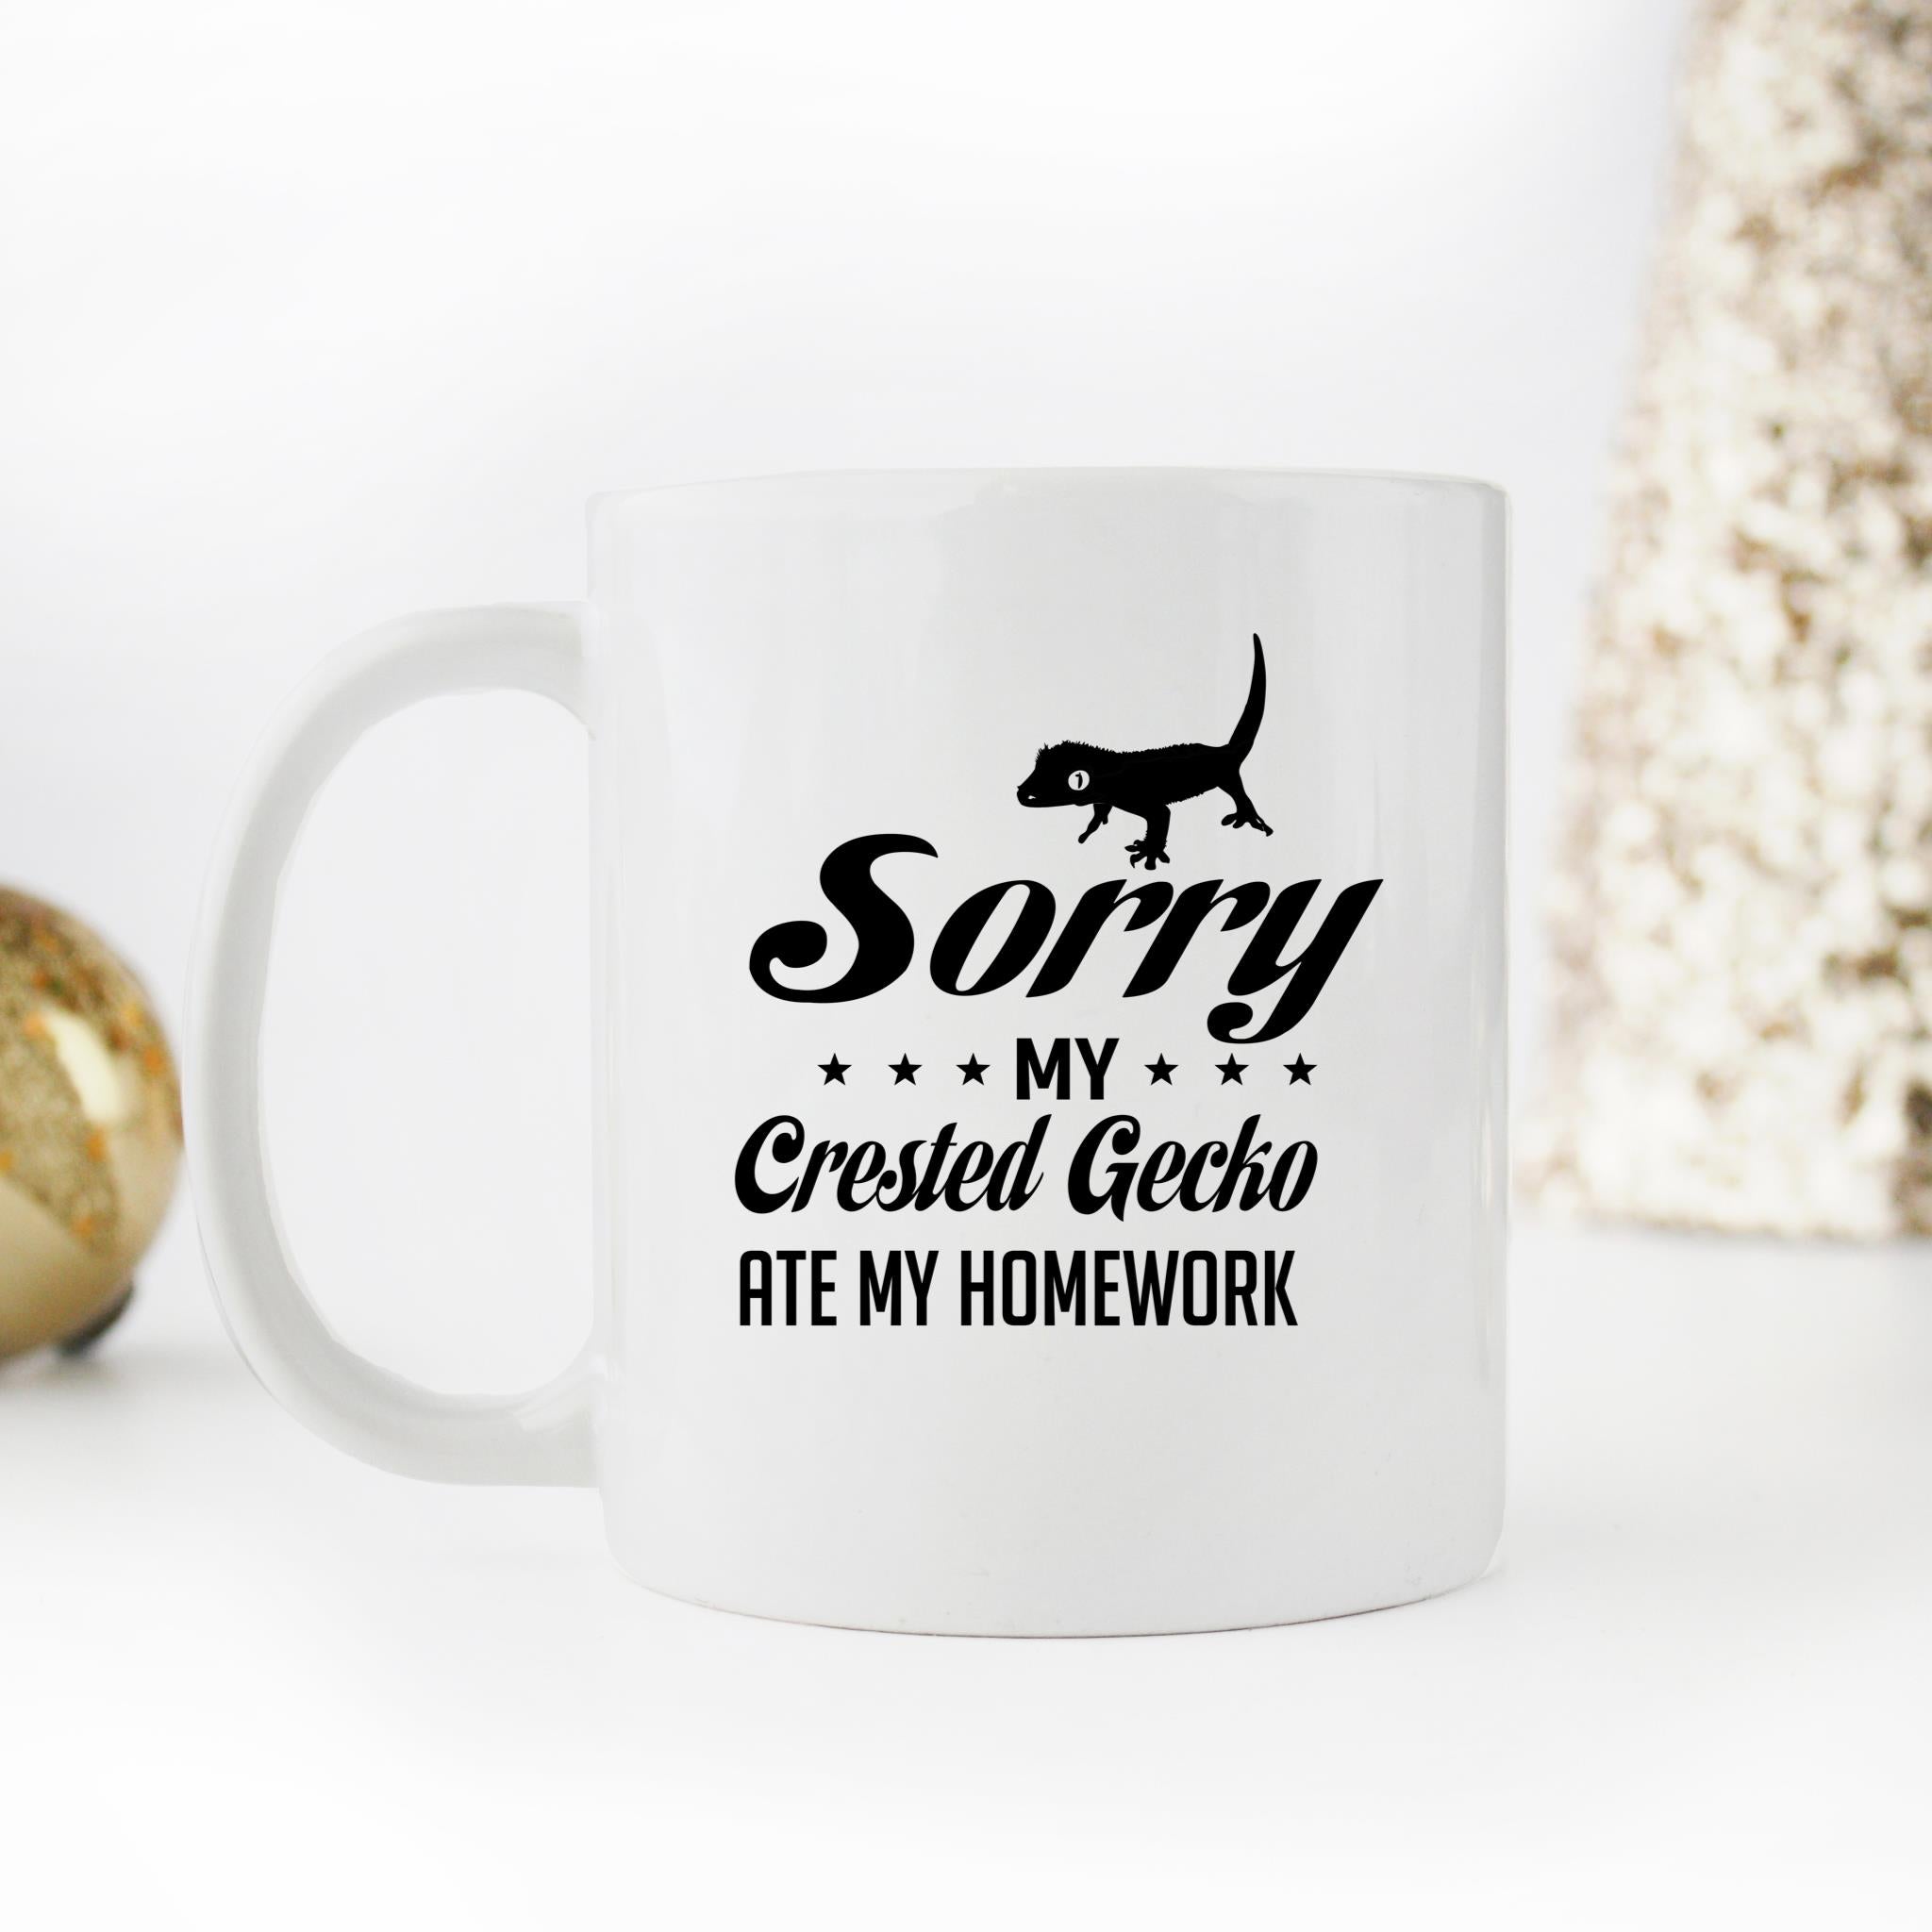 Skitongifts Funny Ceramic Novelty Coffee Mug Crested Gecko Ate My Homework Cute For Animal Lovers BSTrkoq